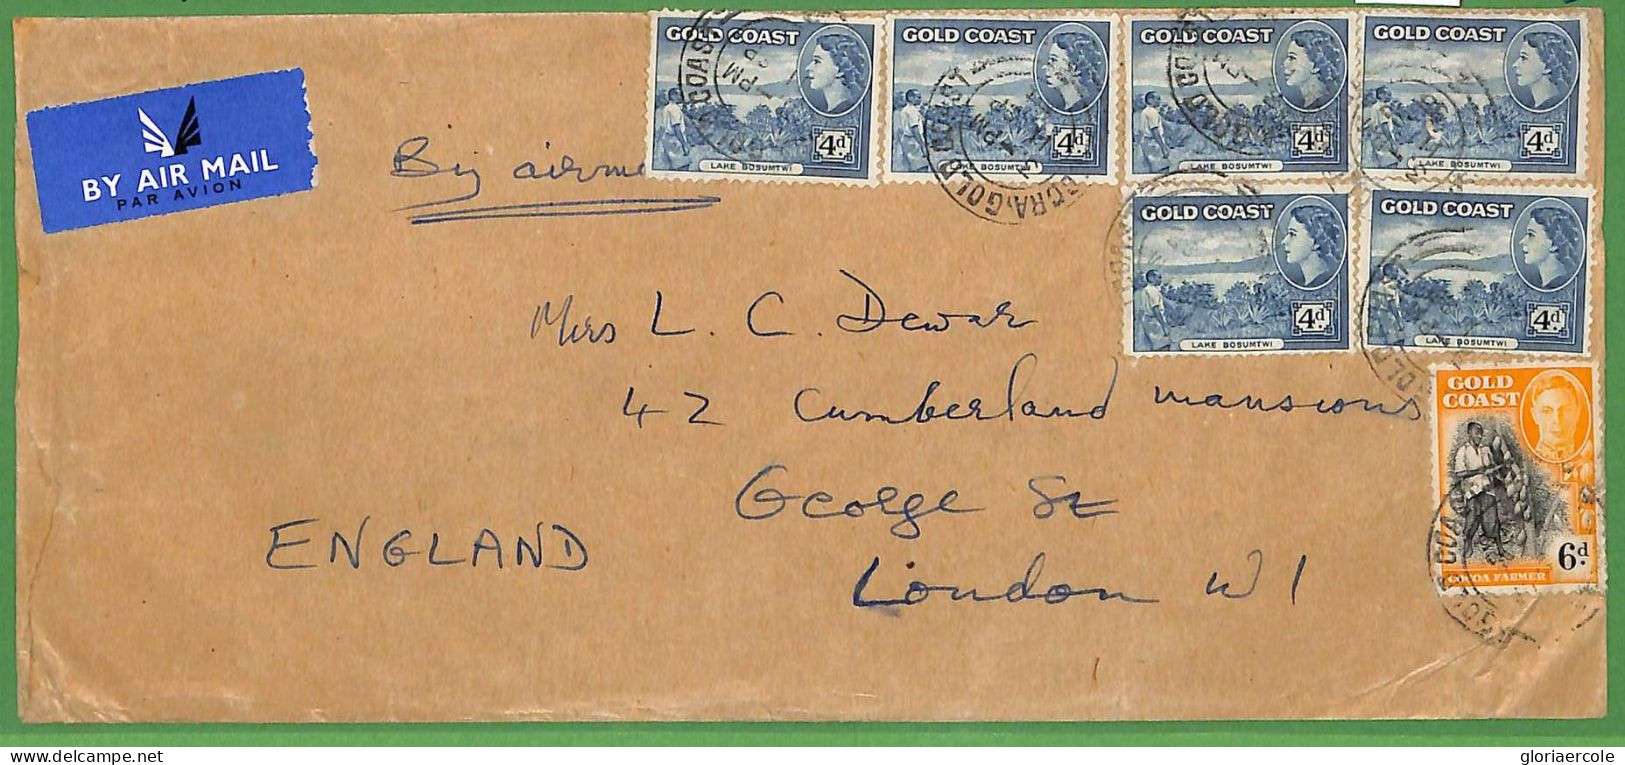 ZA1476 - GOLD COAST - POSTAL HISTORY - Airmail COVER To ENGLAND 1950's - Côte D'Or (...-1957)